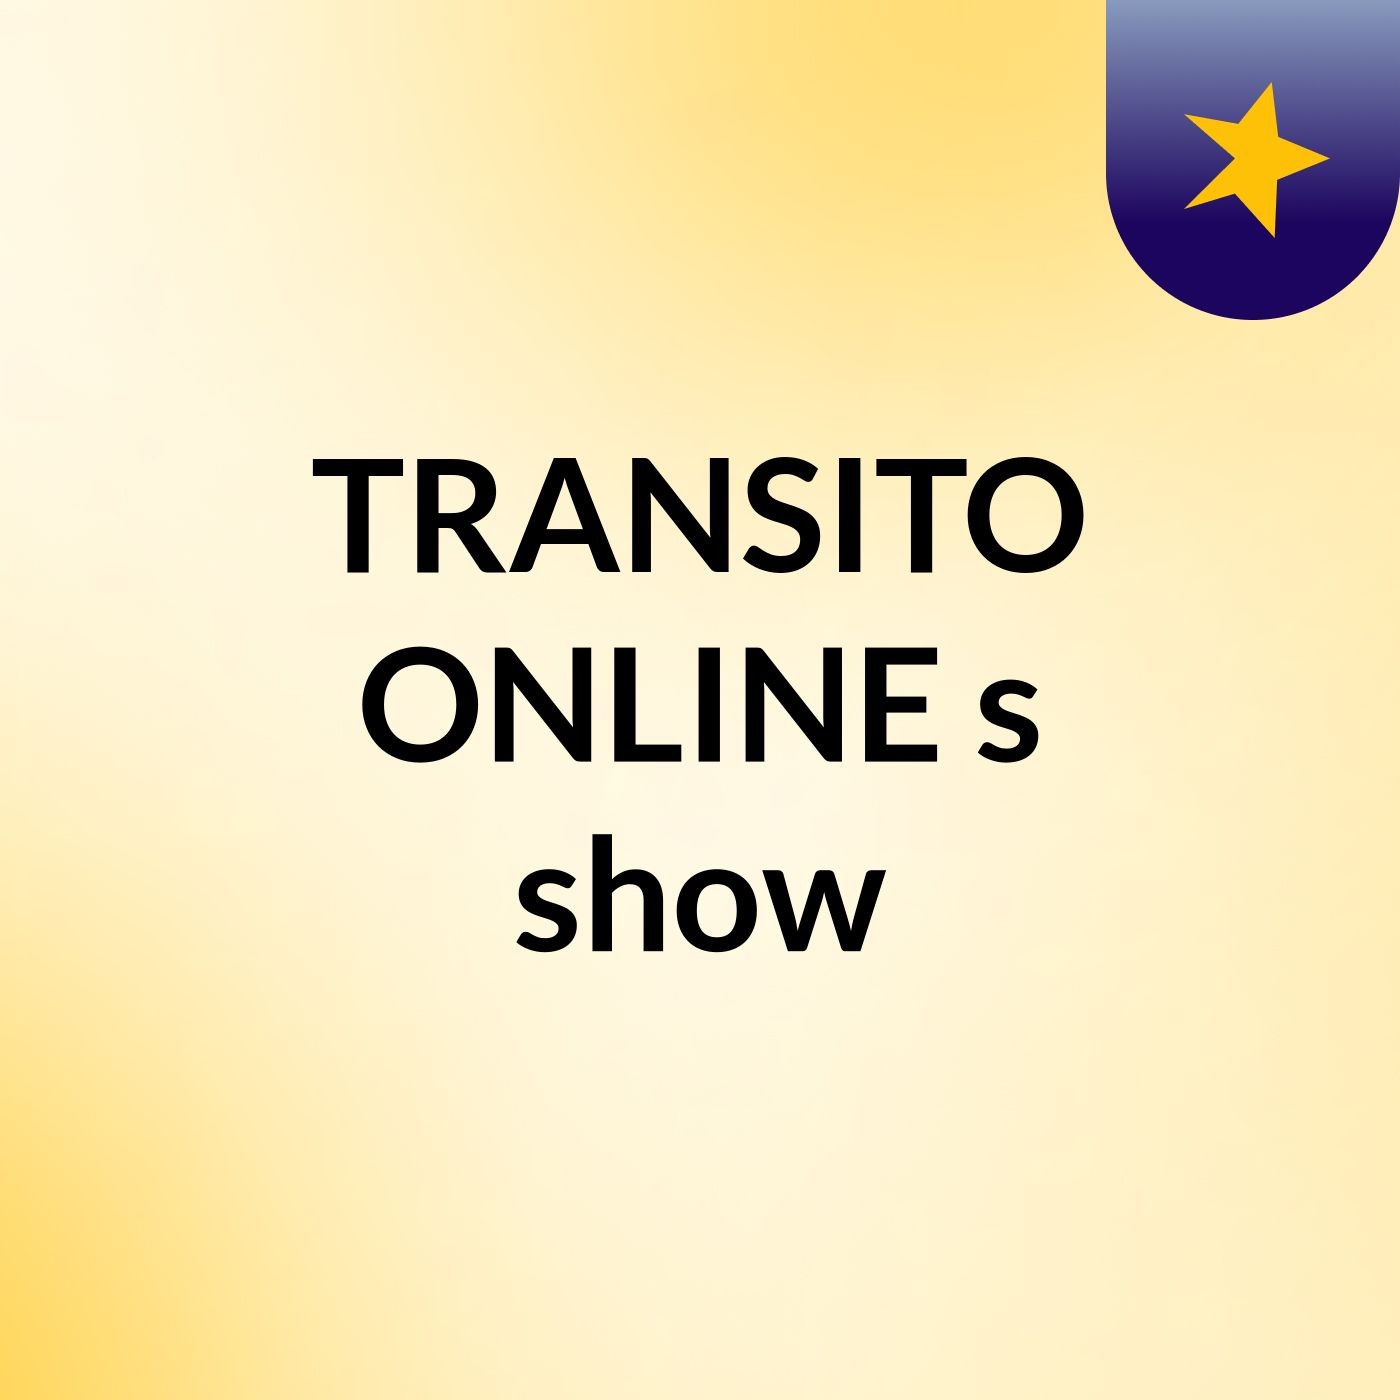 TRANSITO ONLINE's show